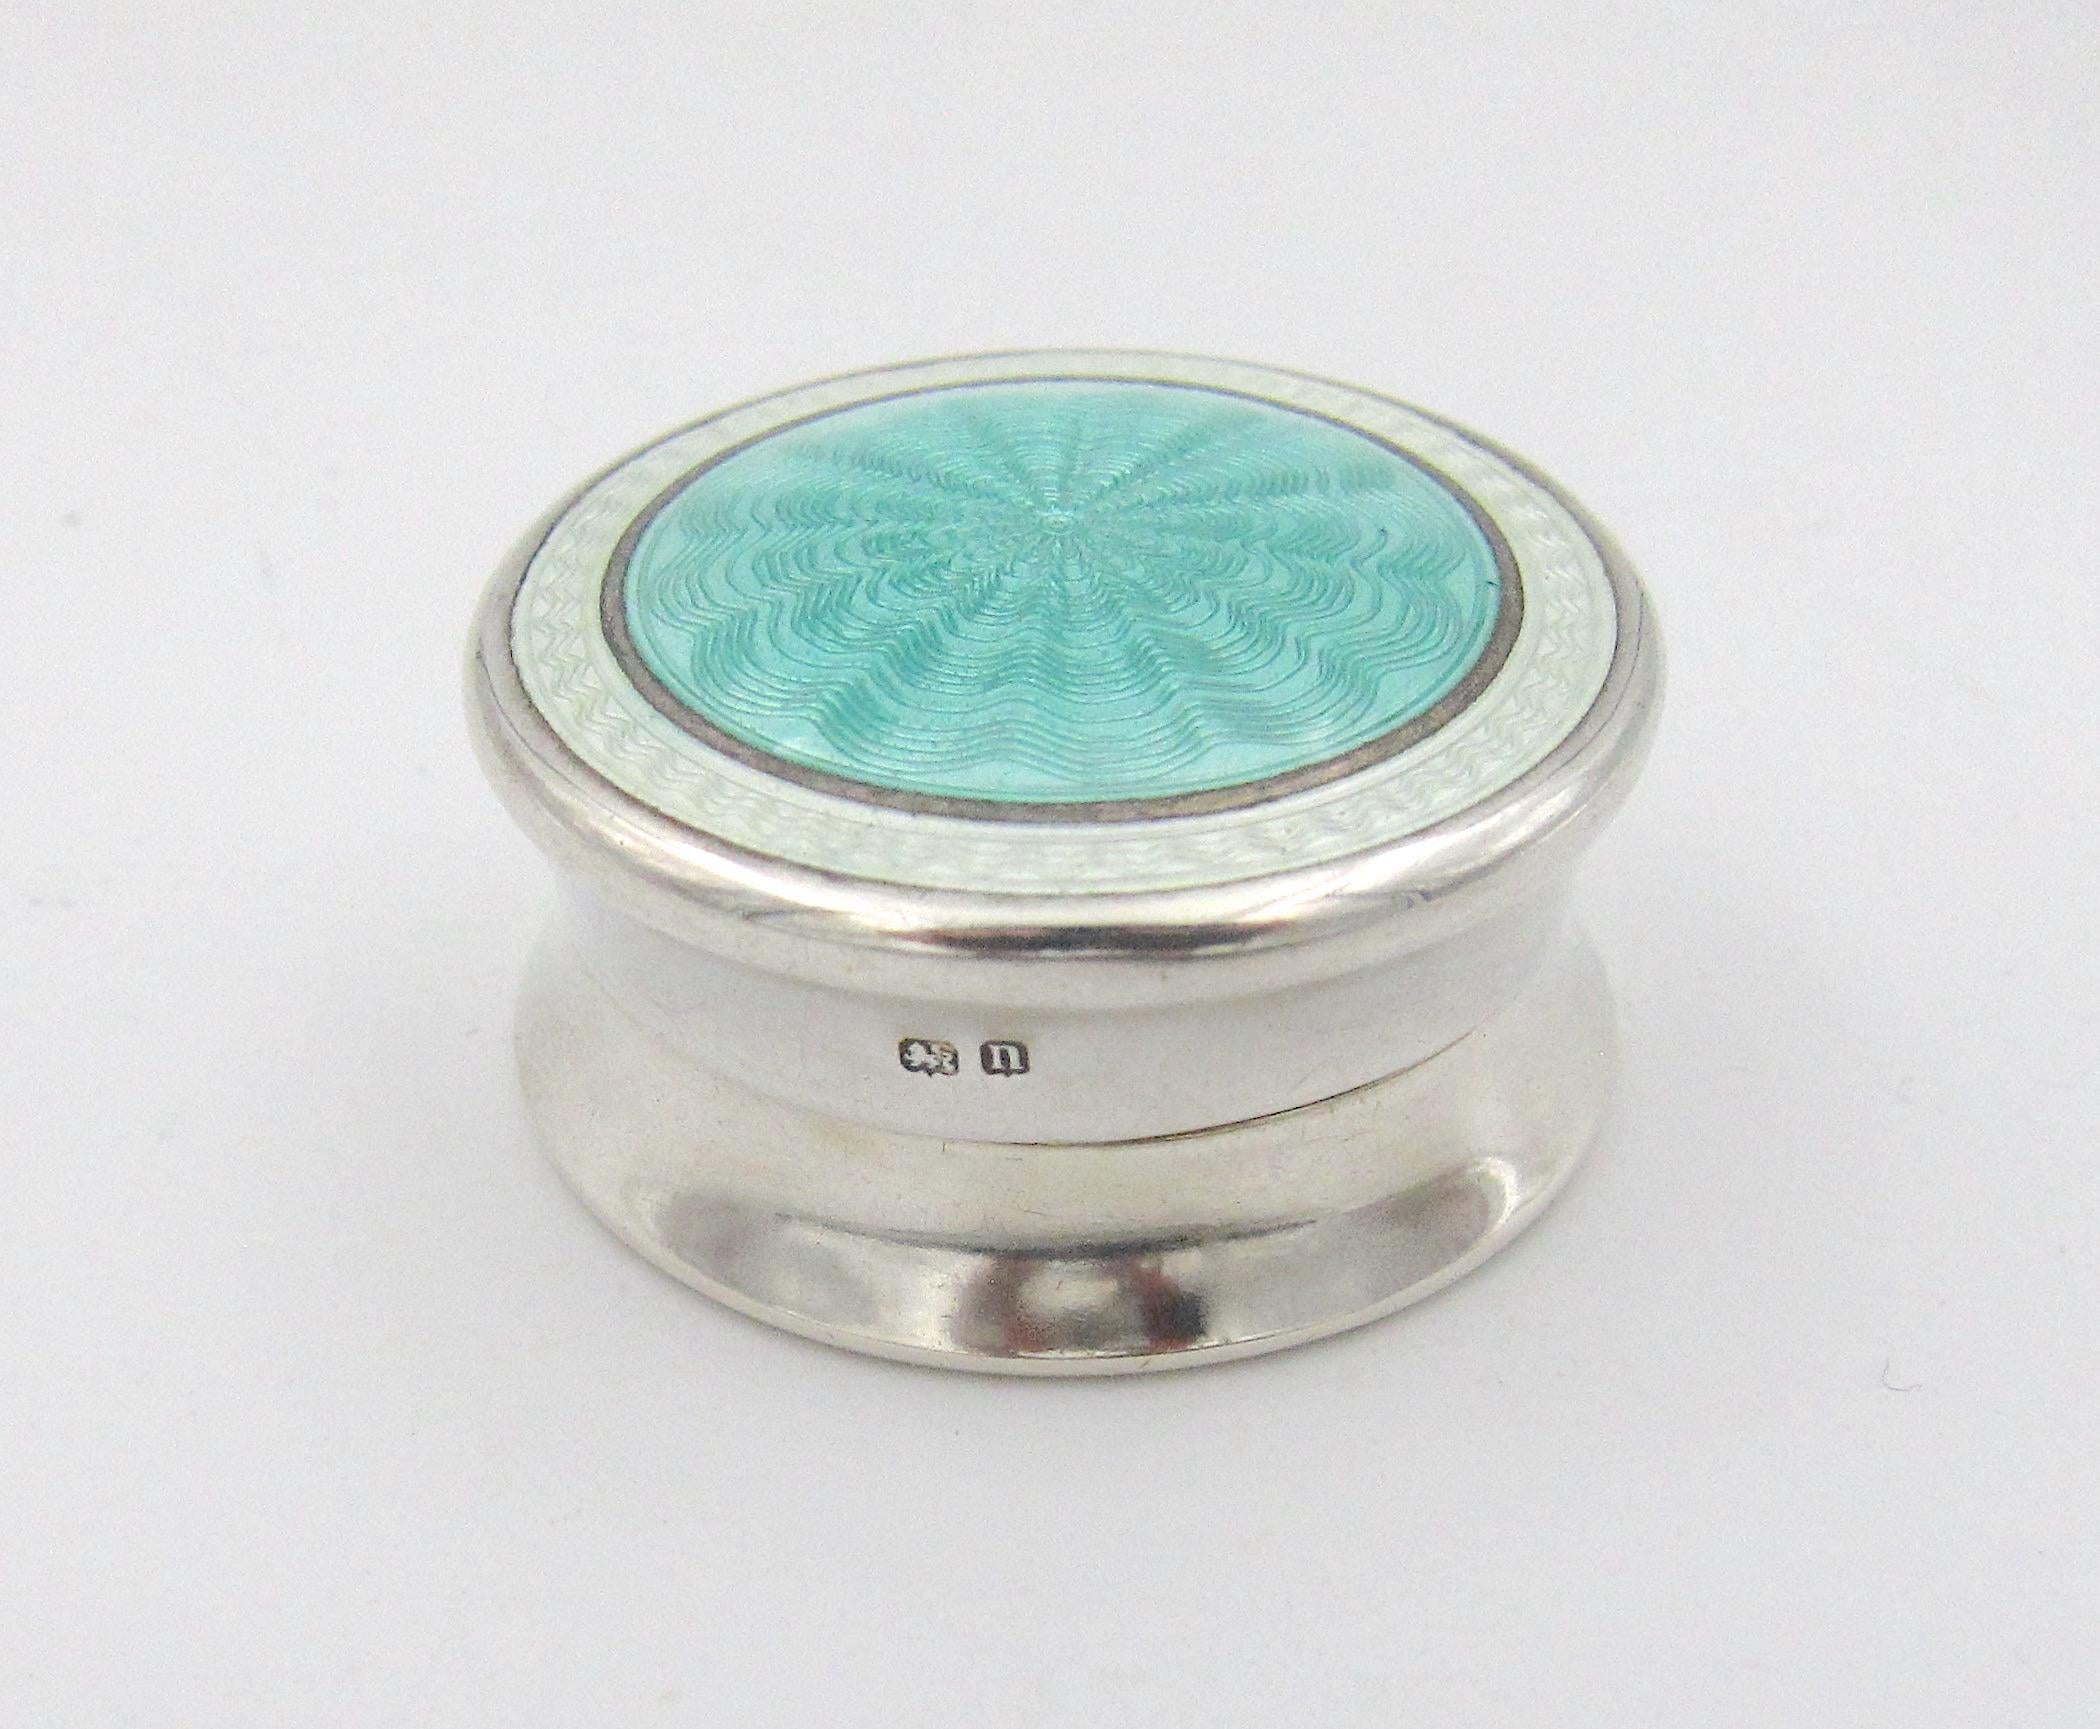 English Sterling Silver Pill Box with Guilloche Enamel Lid by H. V. Pithey & Co. 1